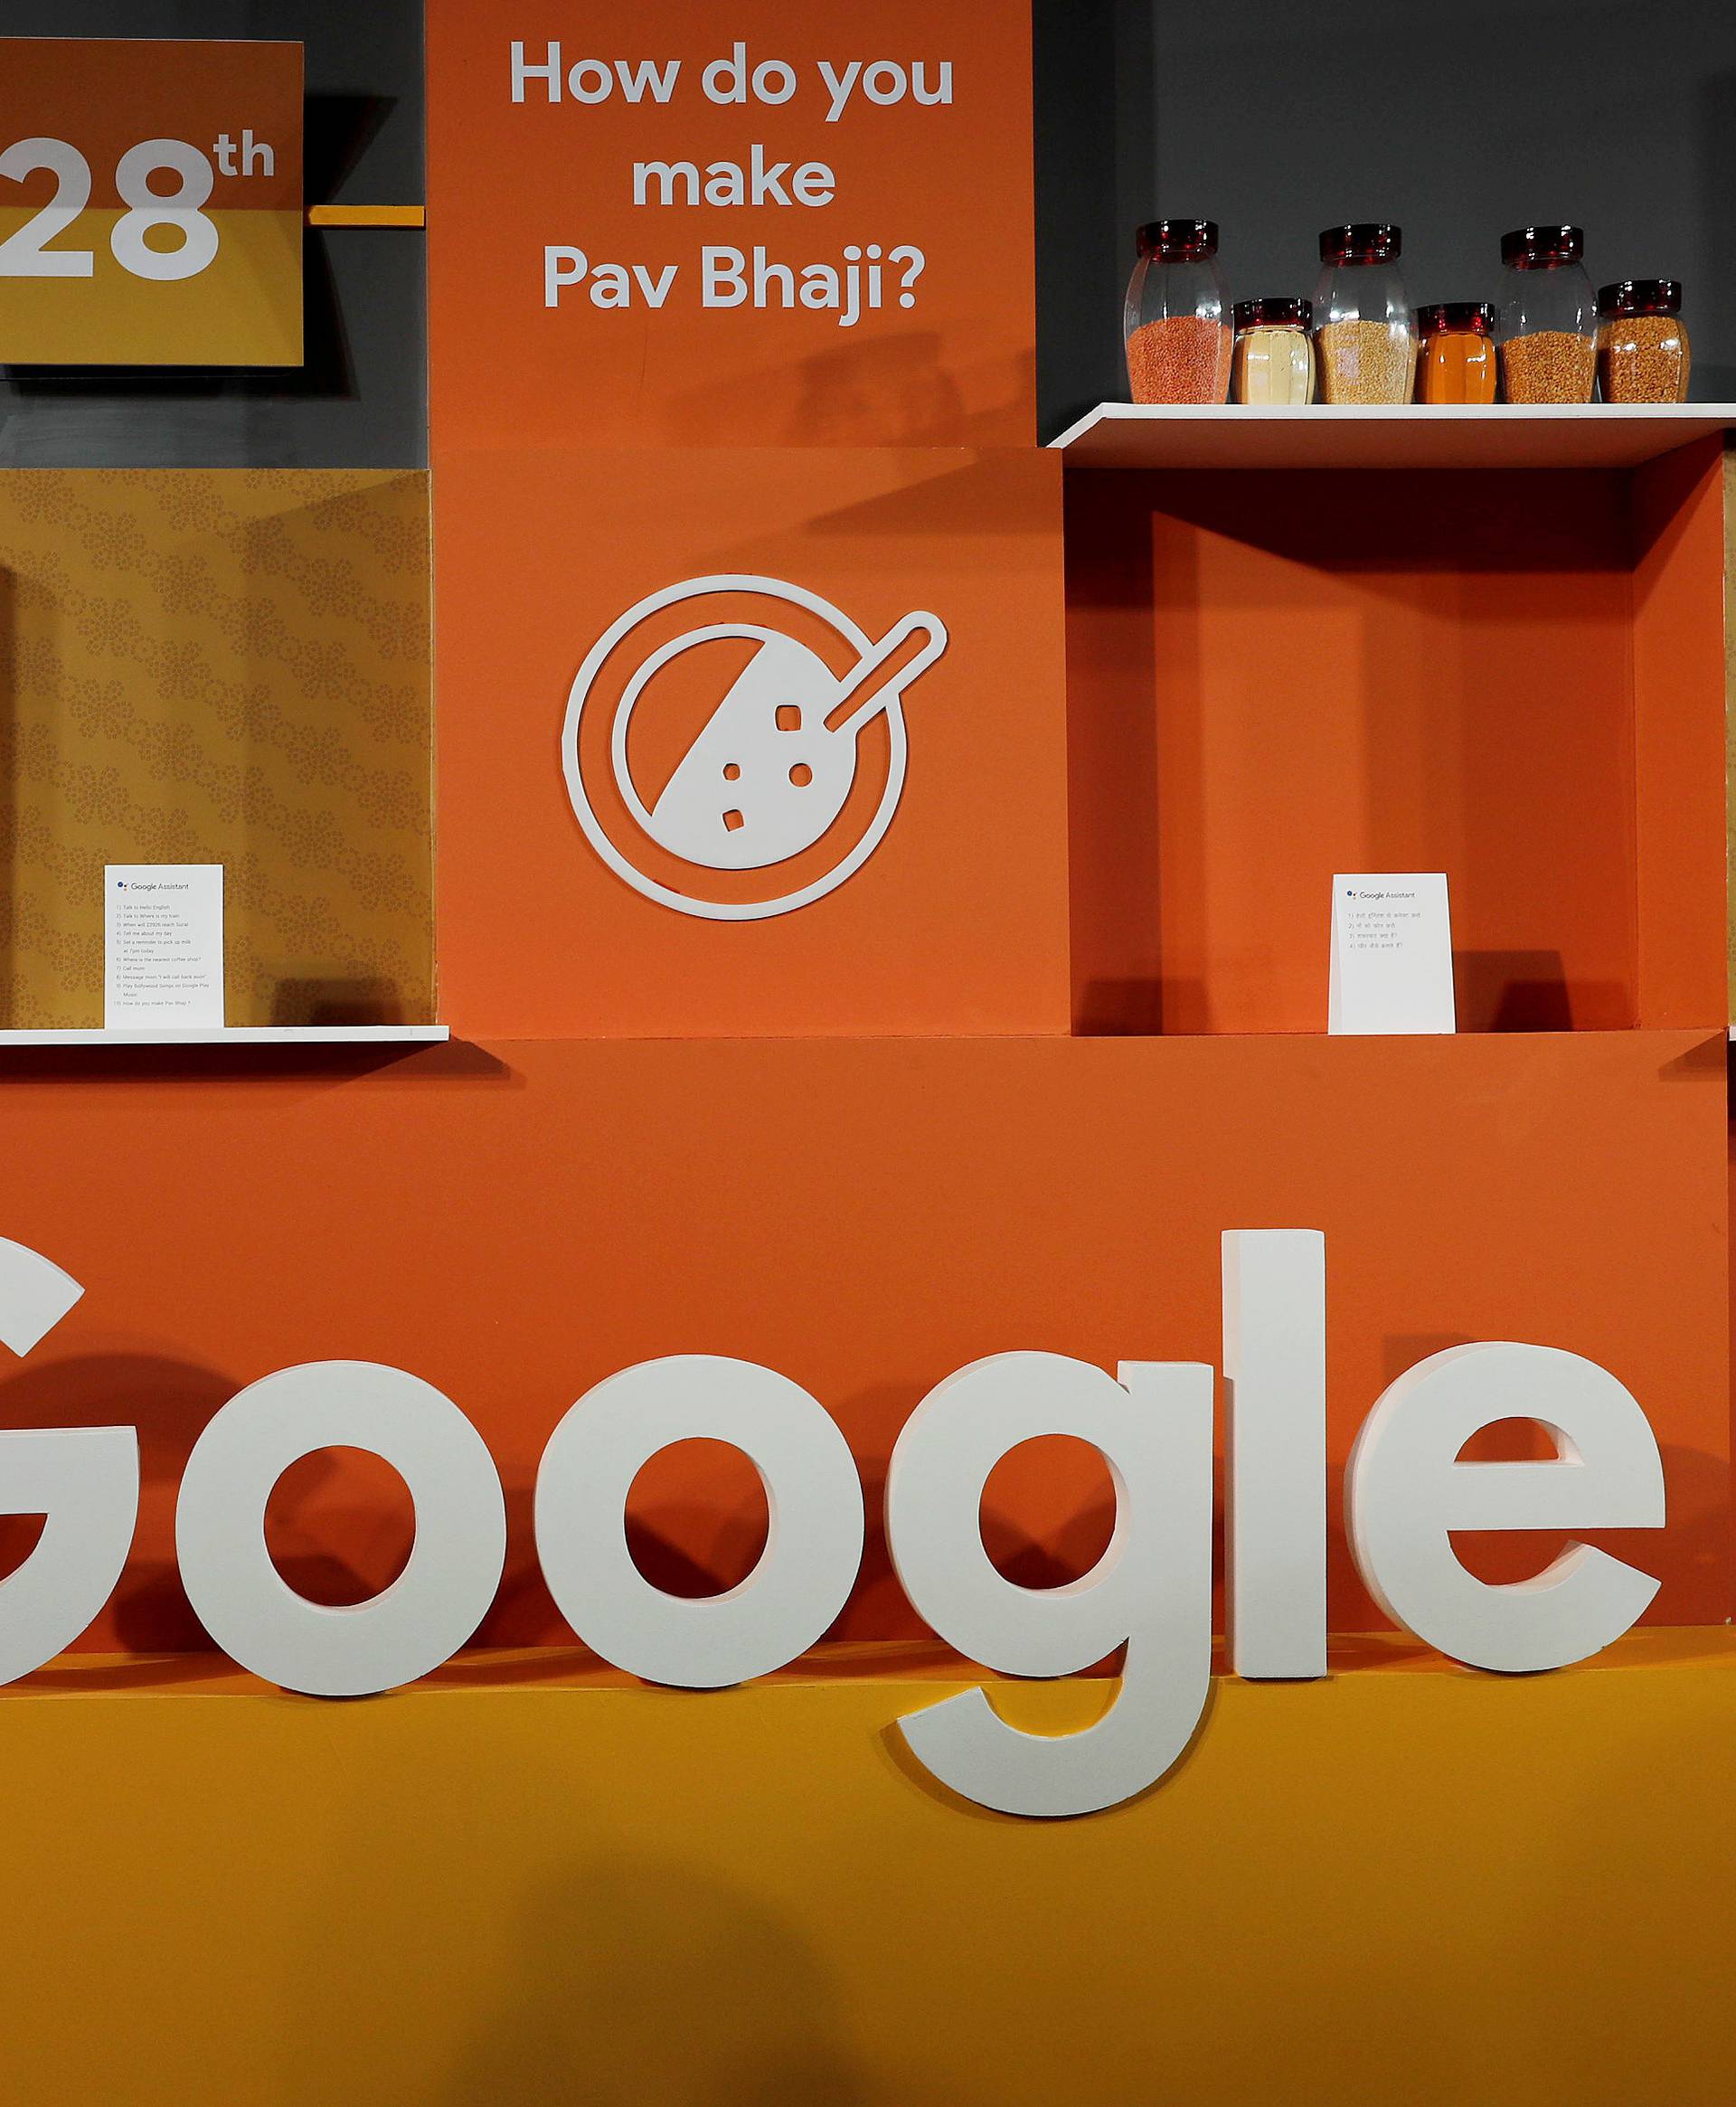 FILE PHOTO: A woman walks past the logo of Google during an event in New Delhi